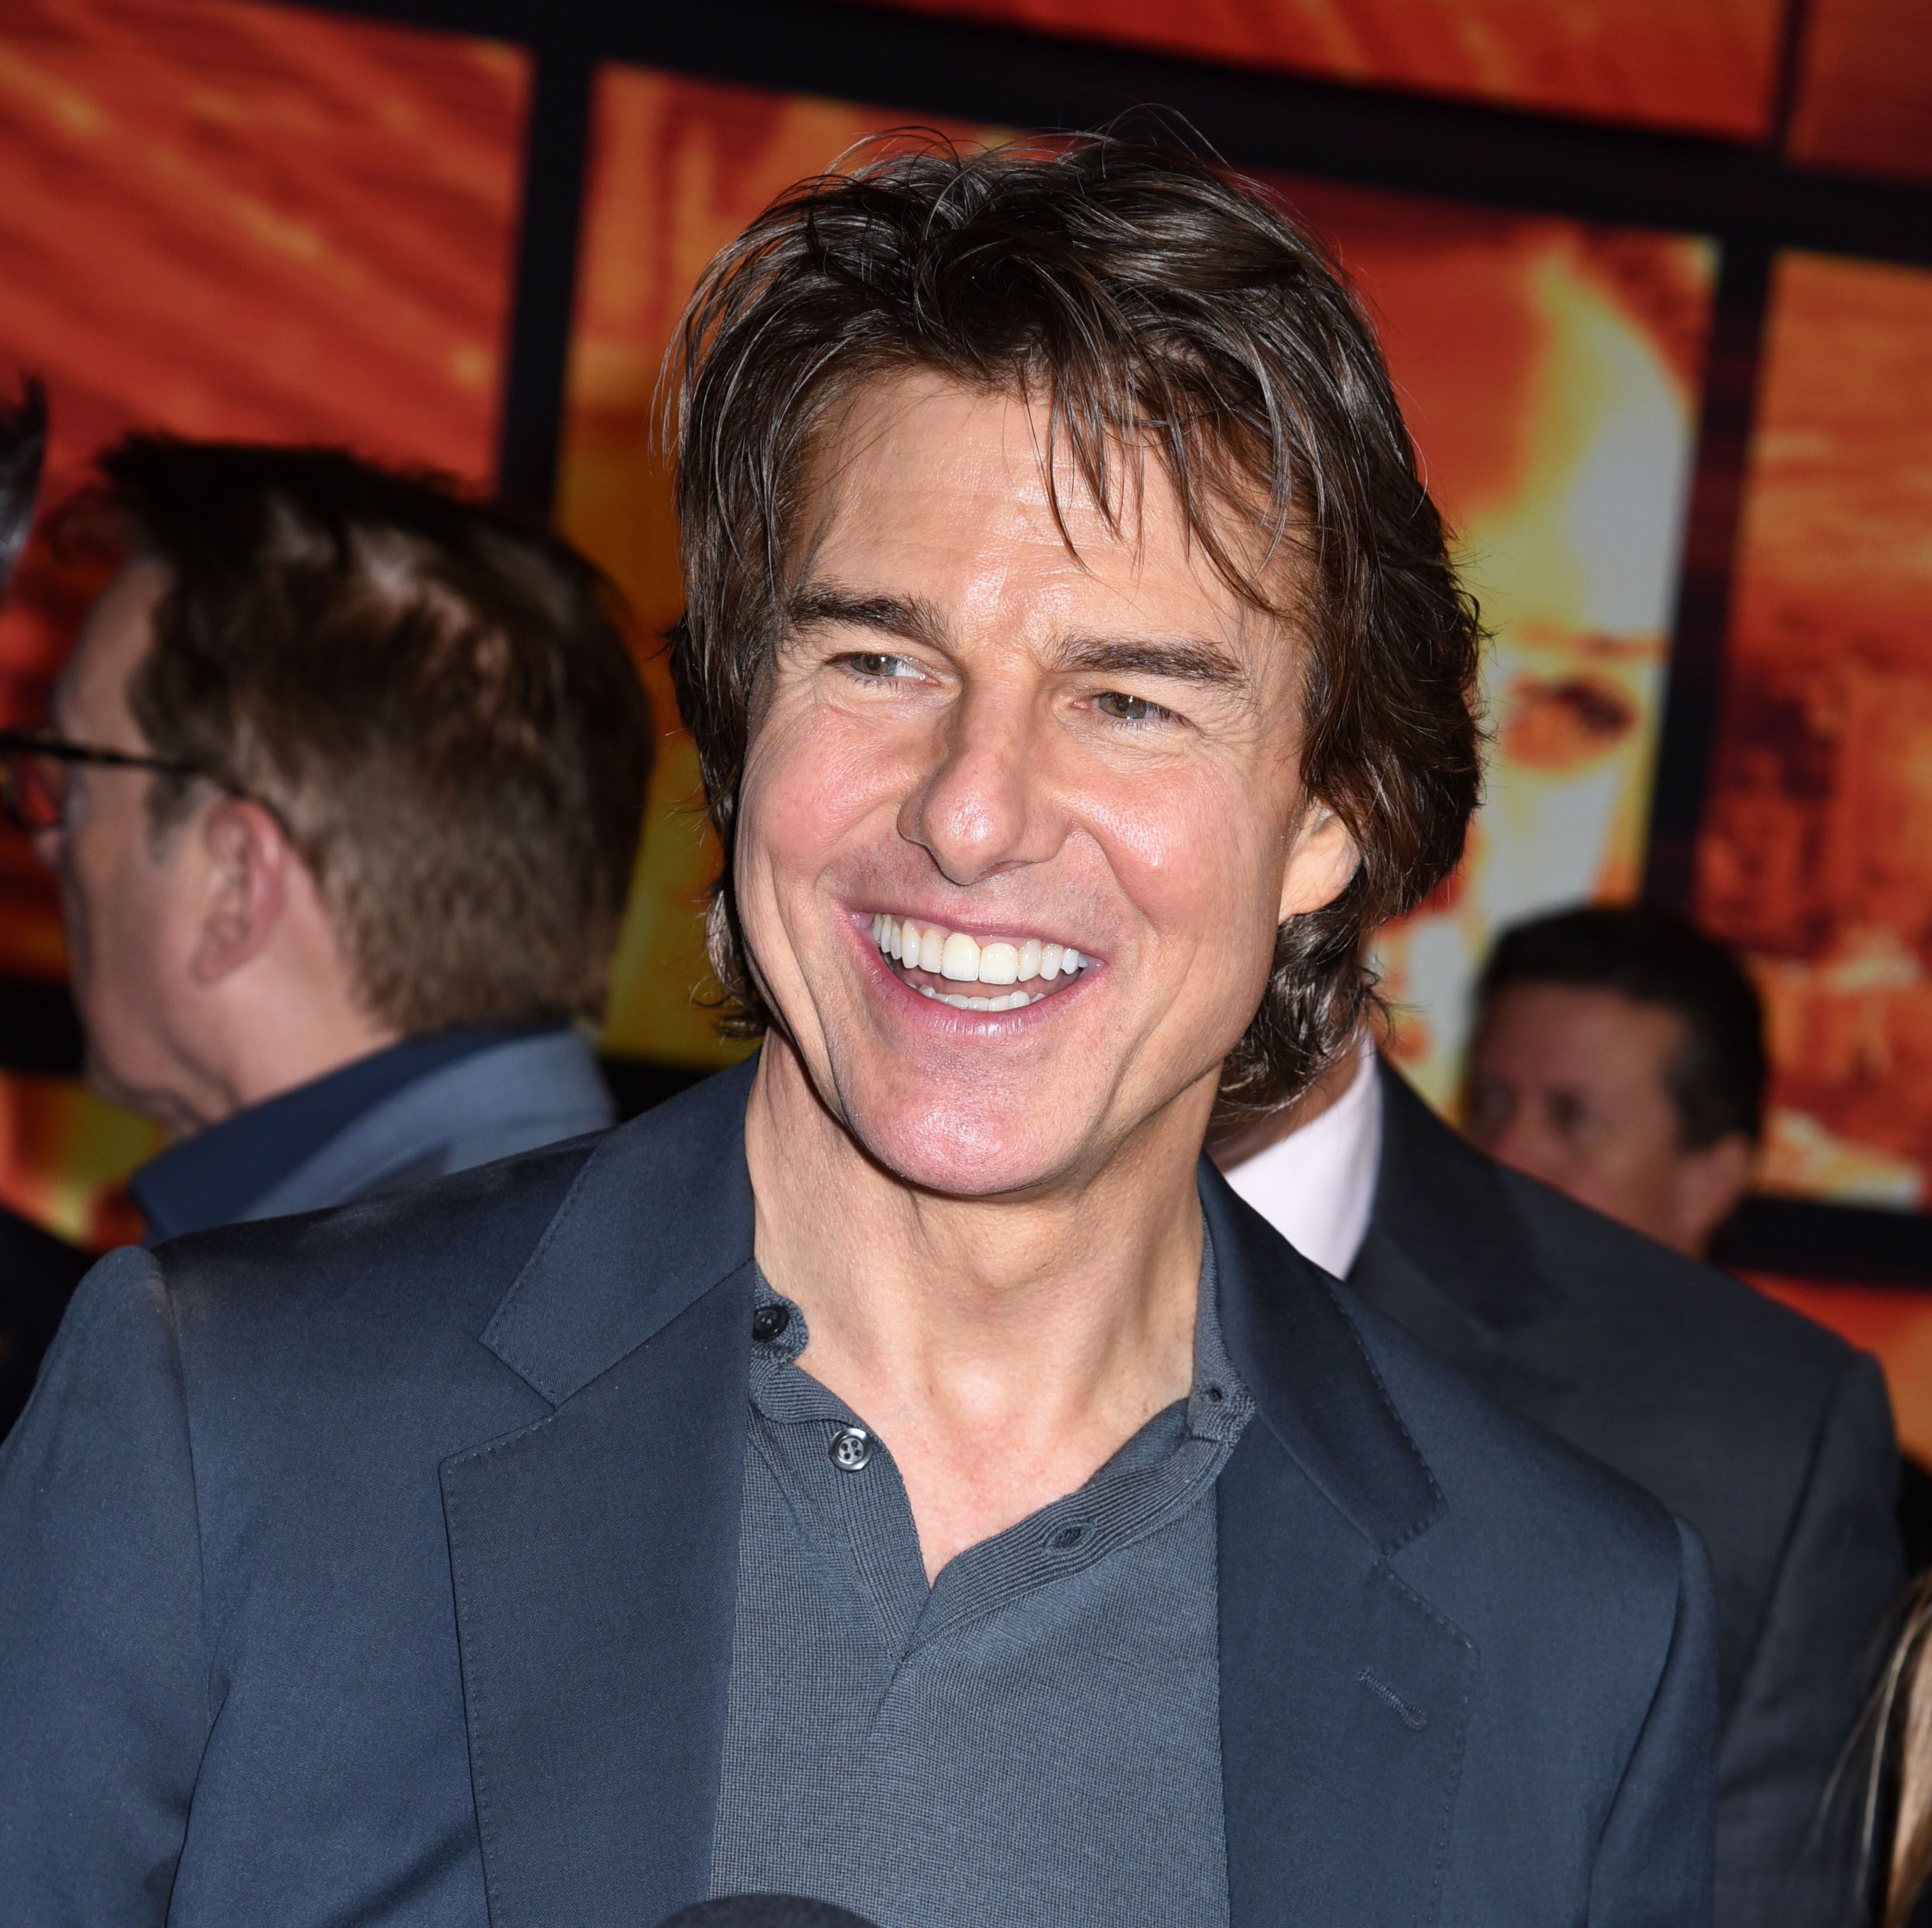 Tom Cruise at the New York premiere of 'Mission: Impossible - Dead Reckoning Part One'